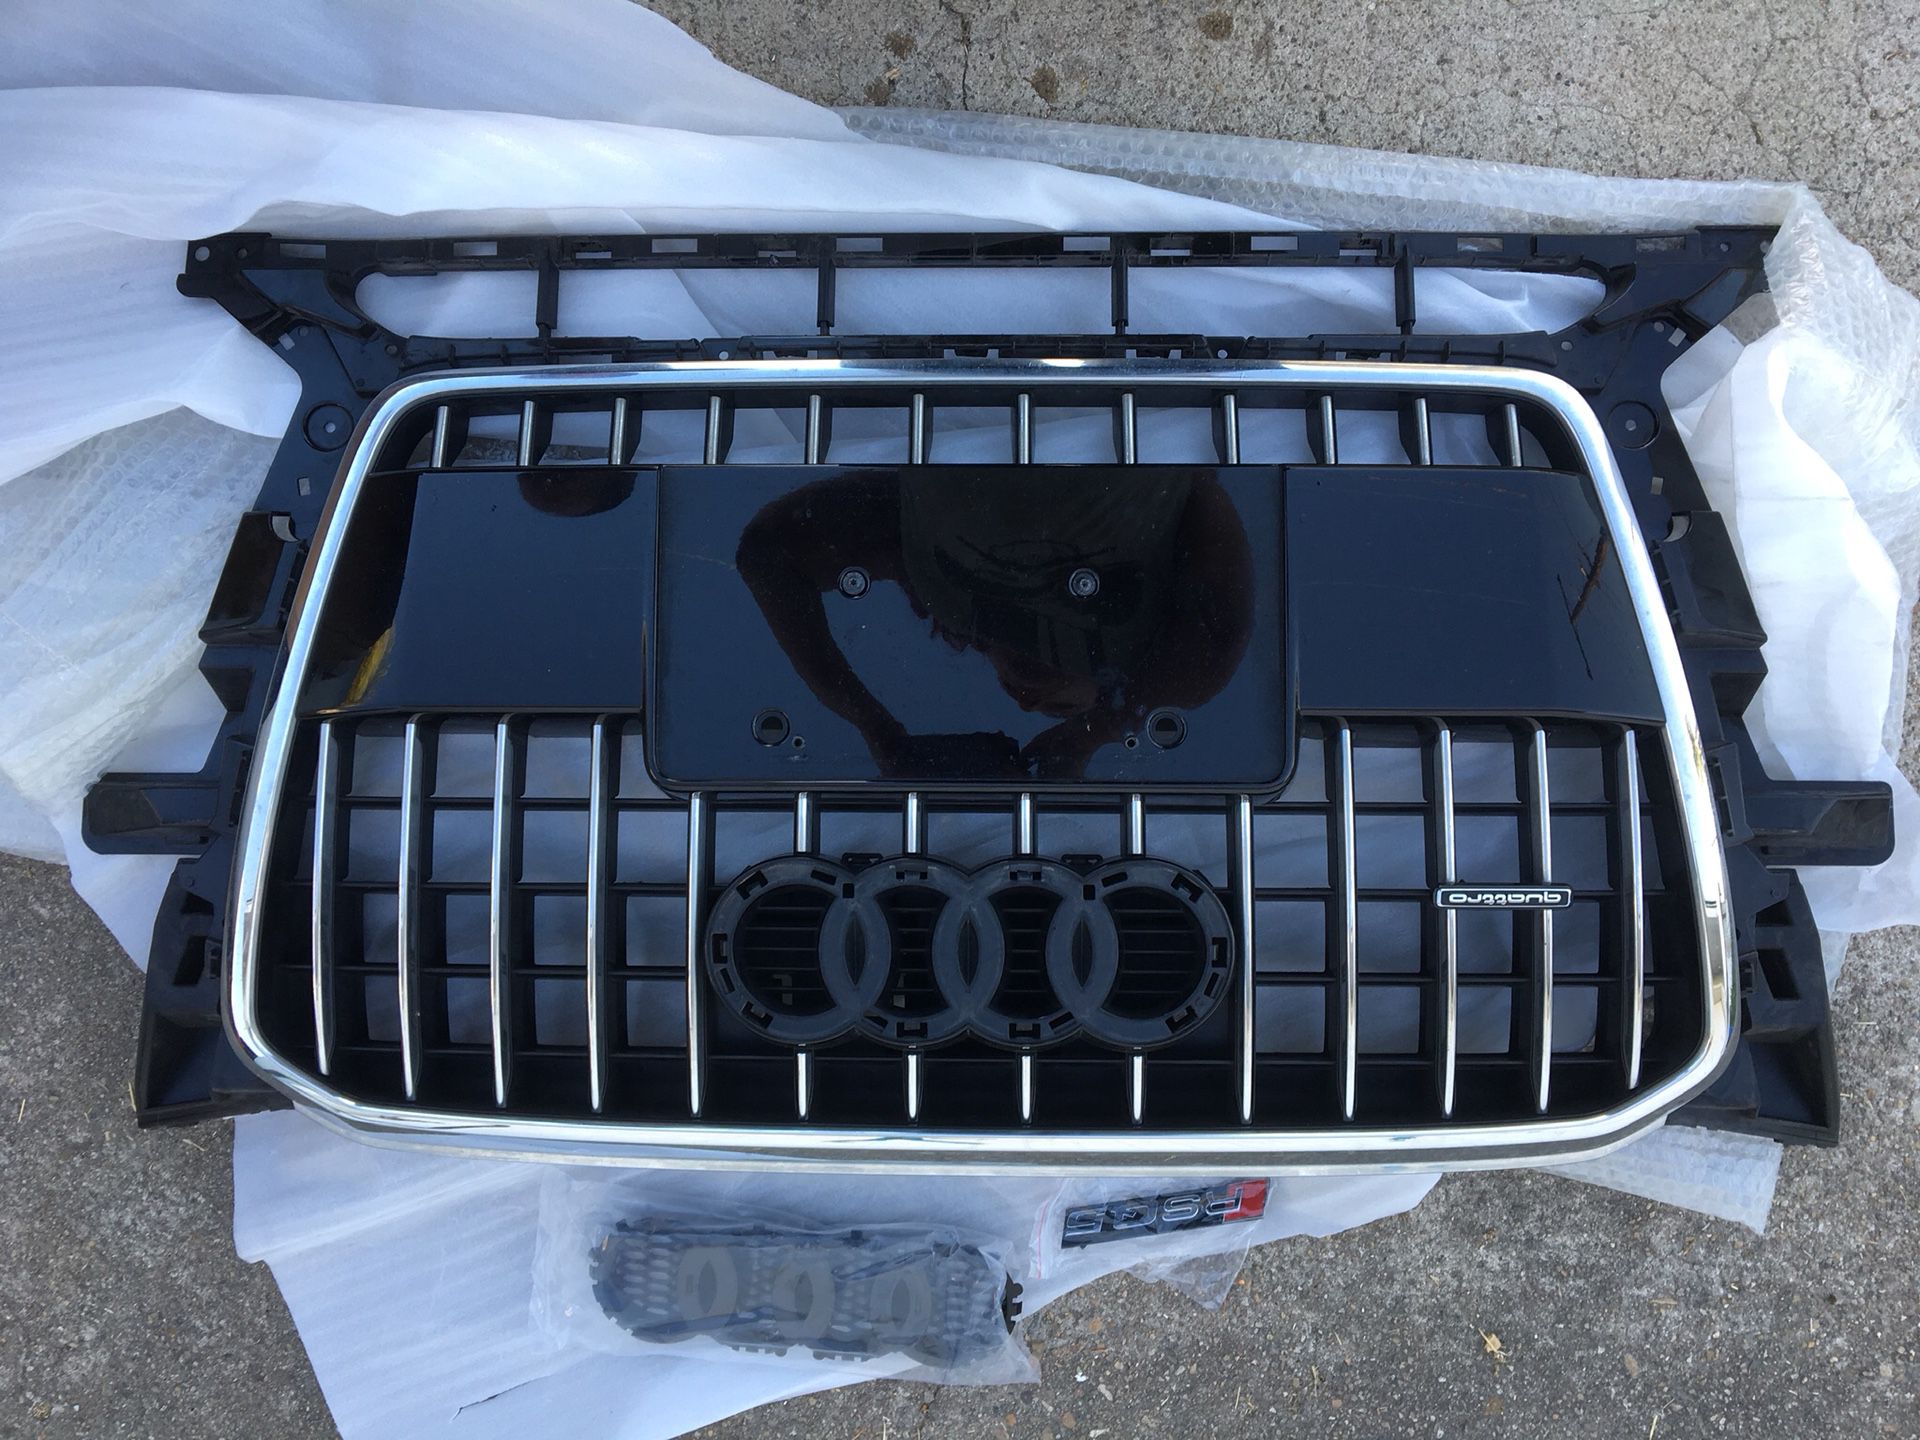 Audi RSQ3 FRONT GRILL WITH EMBLEM&LICENSE PLATE HOLDER- WITH FREE ROOF RACKS (NO LOCKING KEY TOOL)